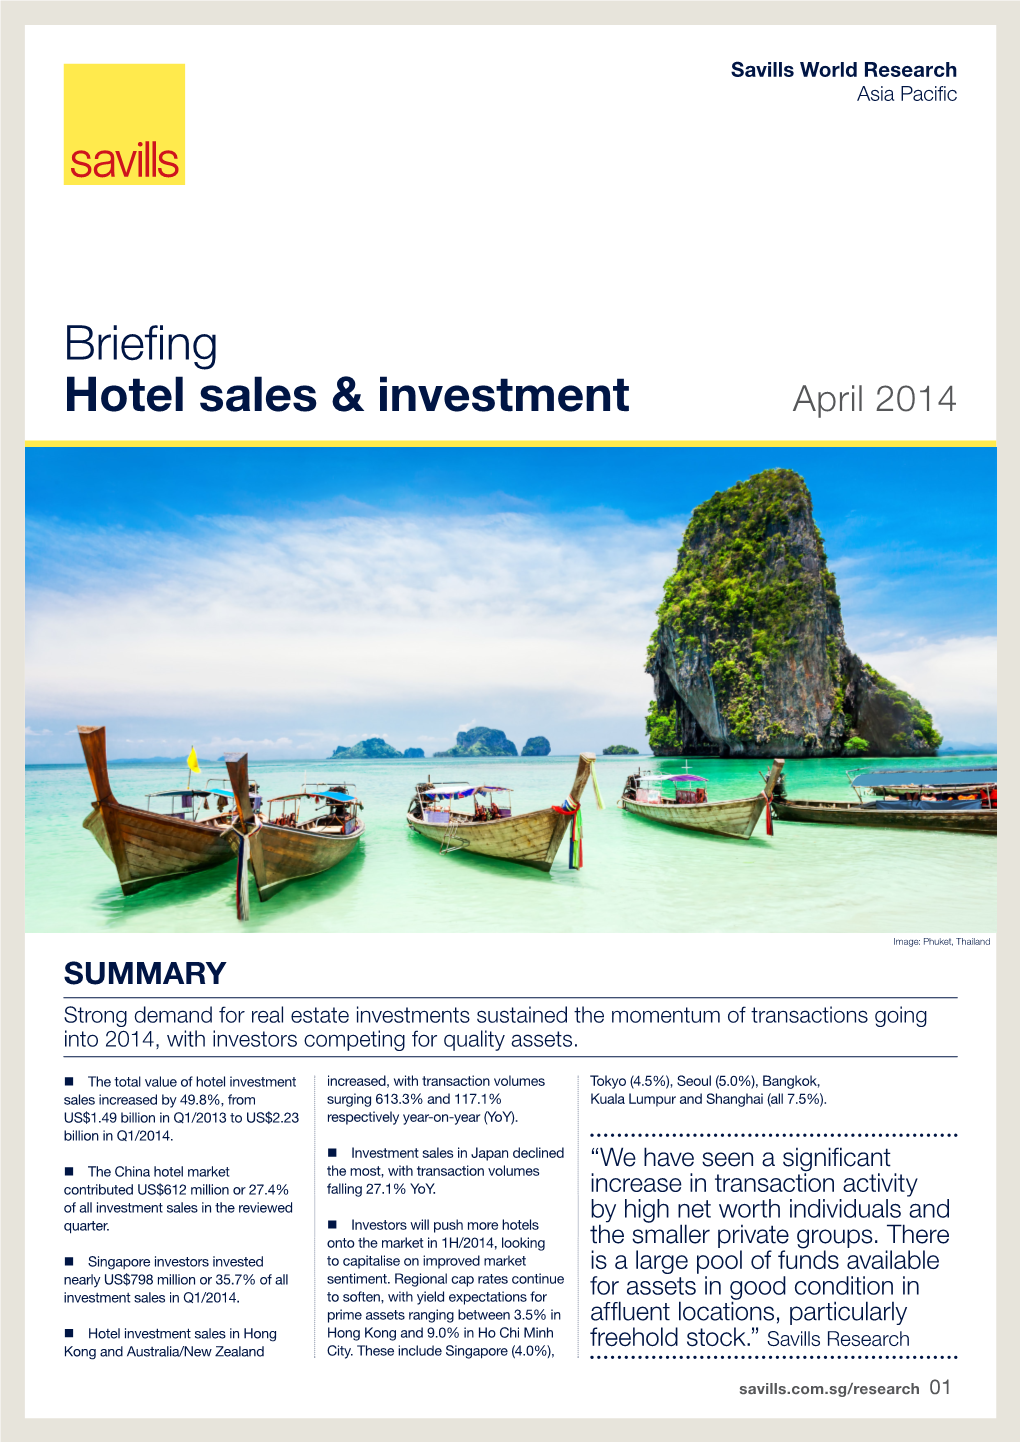 Briefing Hotel Sales & Investment